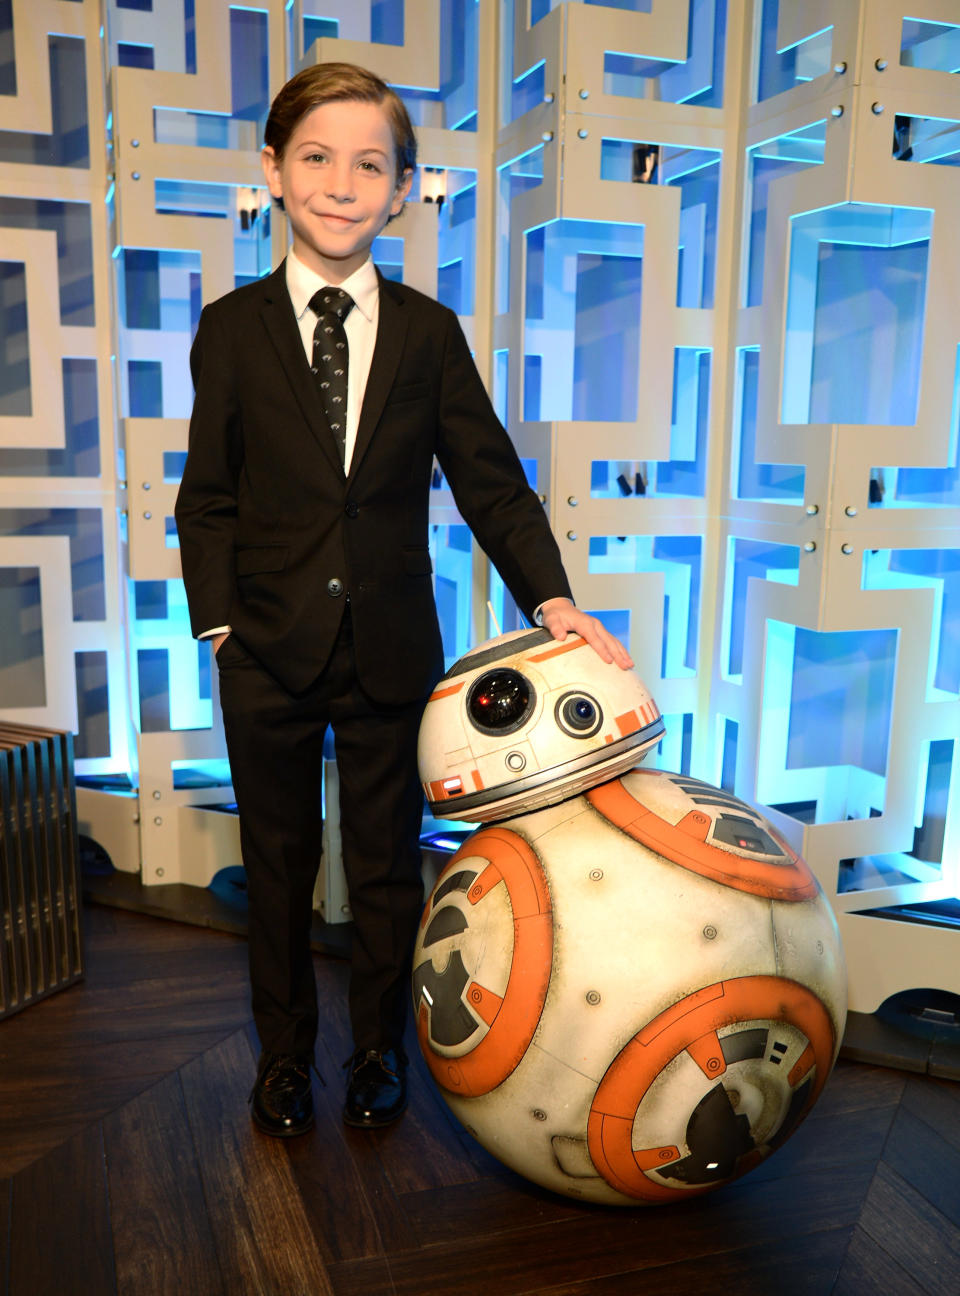 SANTA MONICA, CA - JANUARY 17: Actor Jacob Tremplay poses with "BB-8" from "Star Wars" during the 21st Annual Critics' Choice Awards at Barker Hangar on January 17, 2016 in Santa Monica, California. (Photo by Kevin Mazur/WireImage)